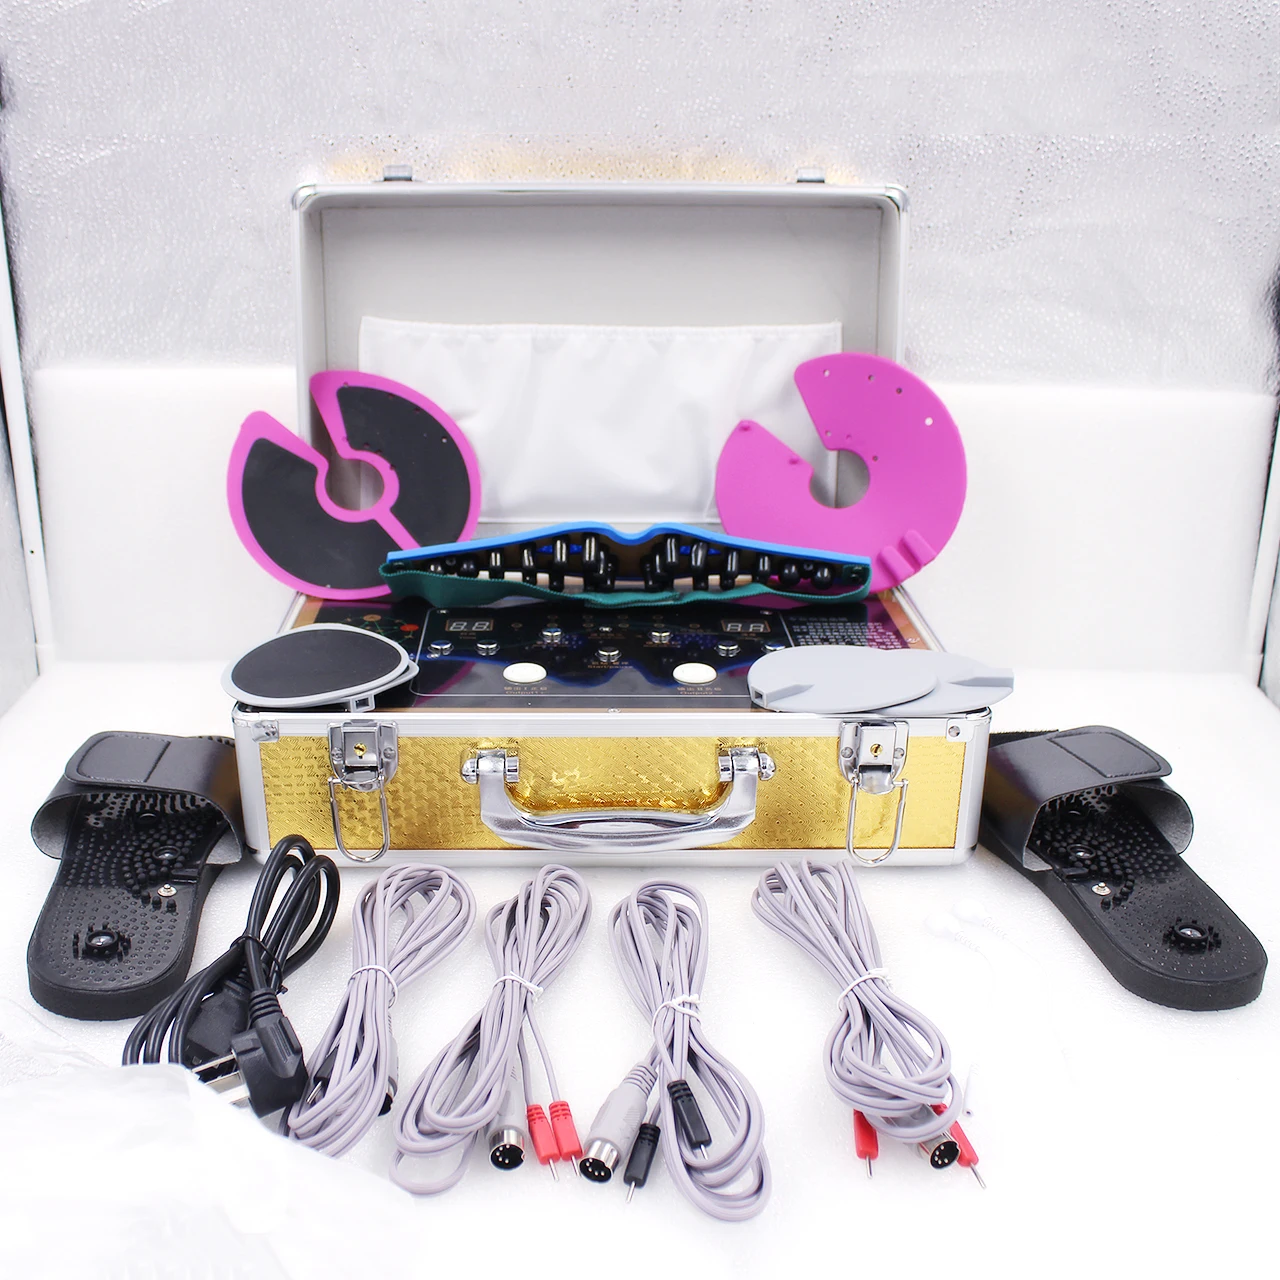 Acid and alkali level / dds bio-electric massage / multi-functional home electrotherapy instrument / beauty regimen meridian dod